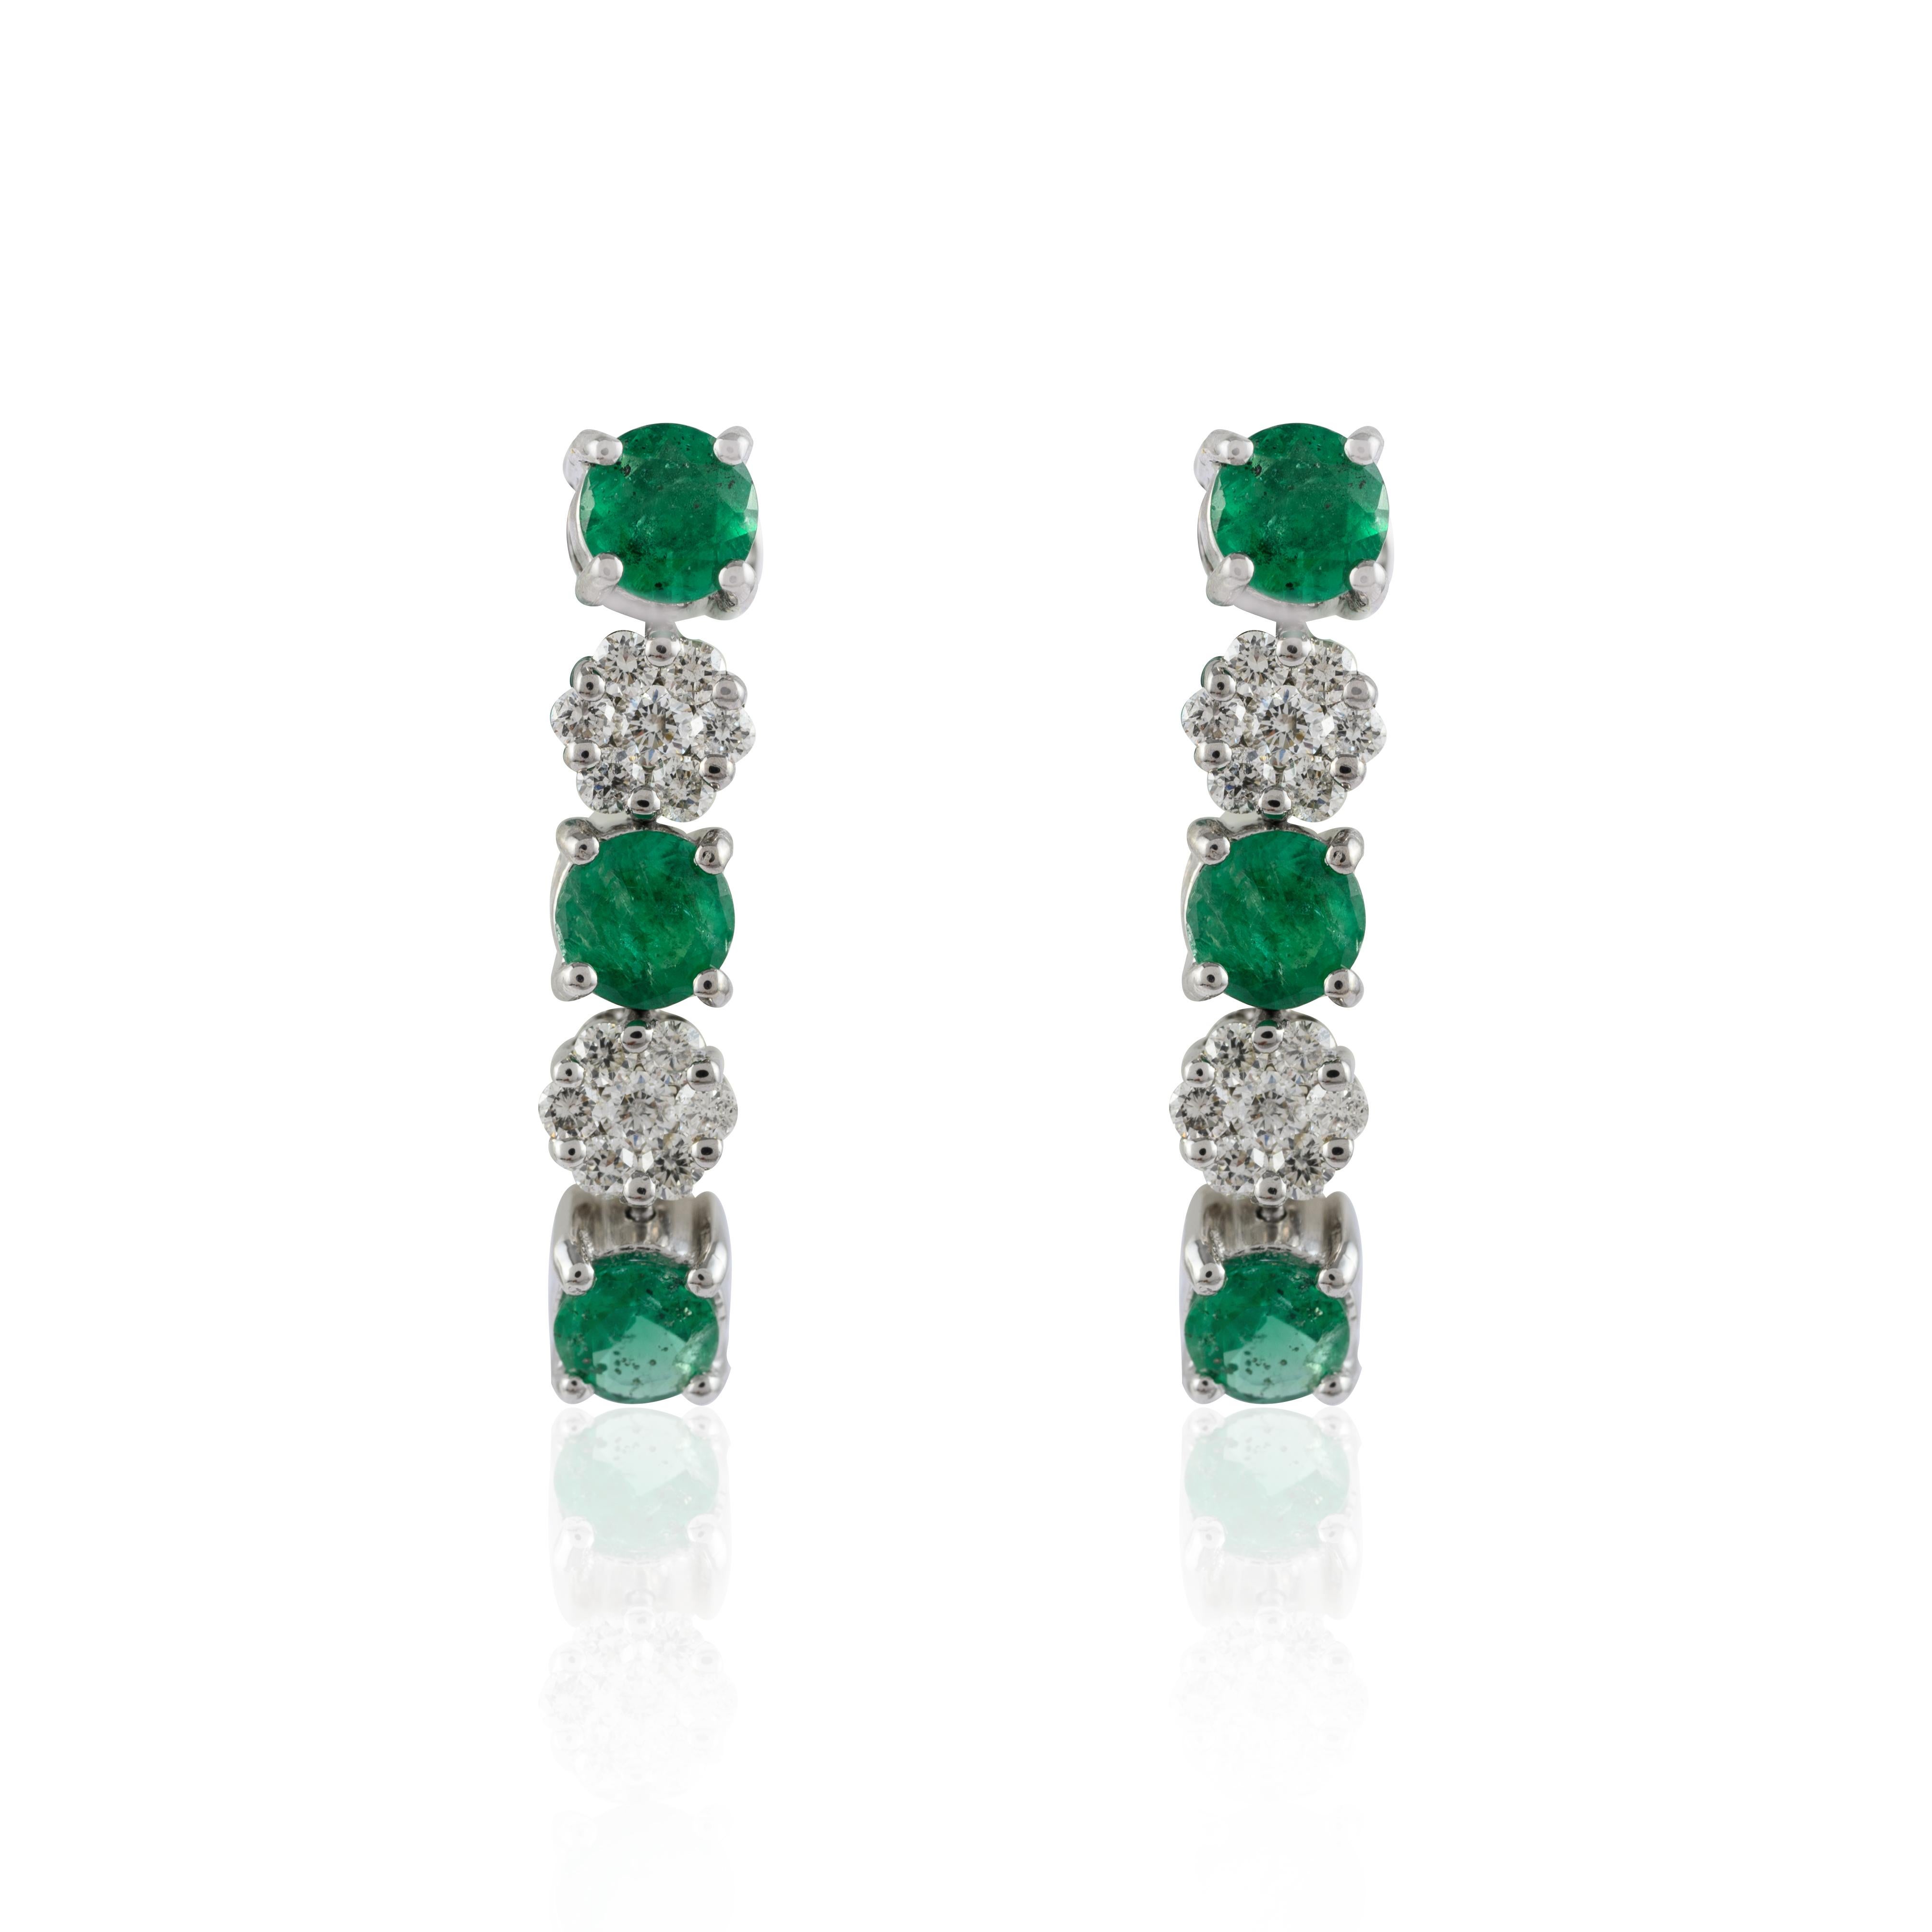 Emerald Diamond Dangle Earrings in 14K gold to make a statement with your look. These earrings create a sparkling, luxurious look featuring round cut emerald.
Emerald gemstone enhances the intellectual capacity of the person.
Designed with alternate